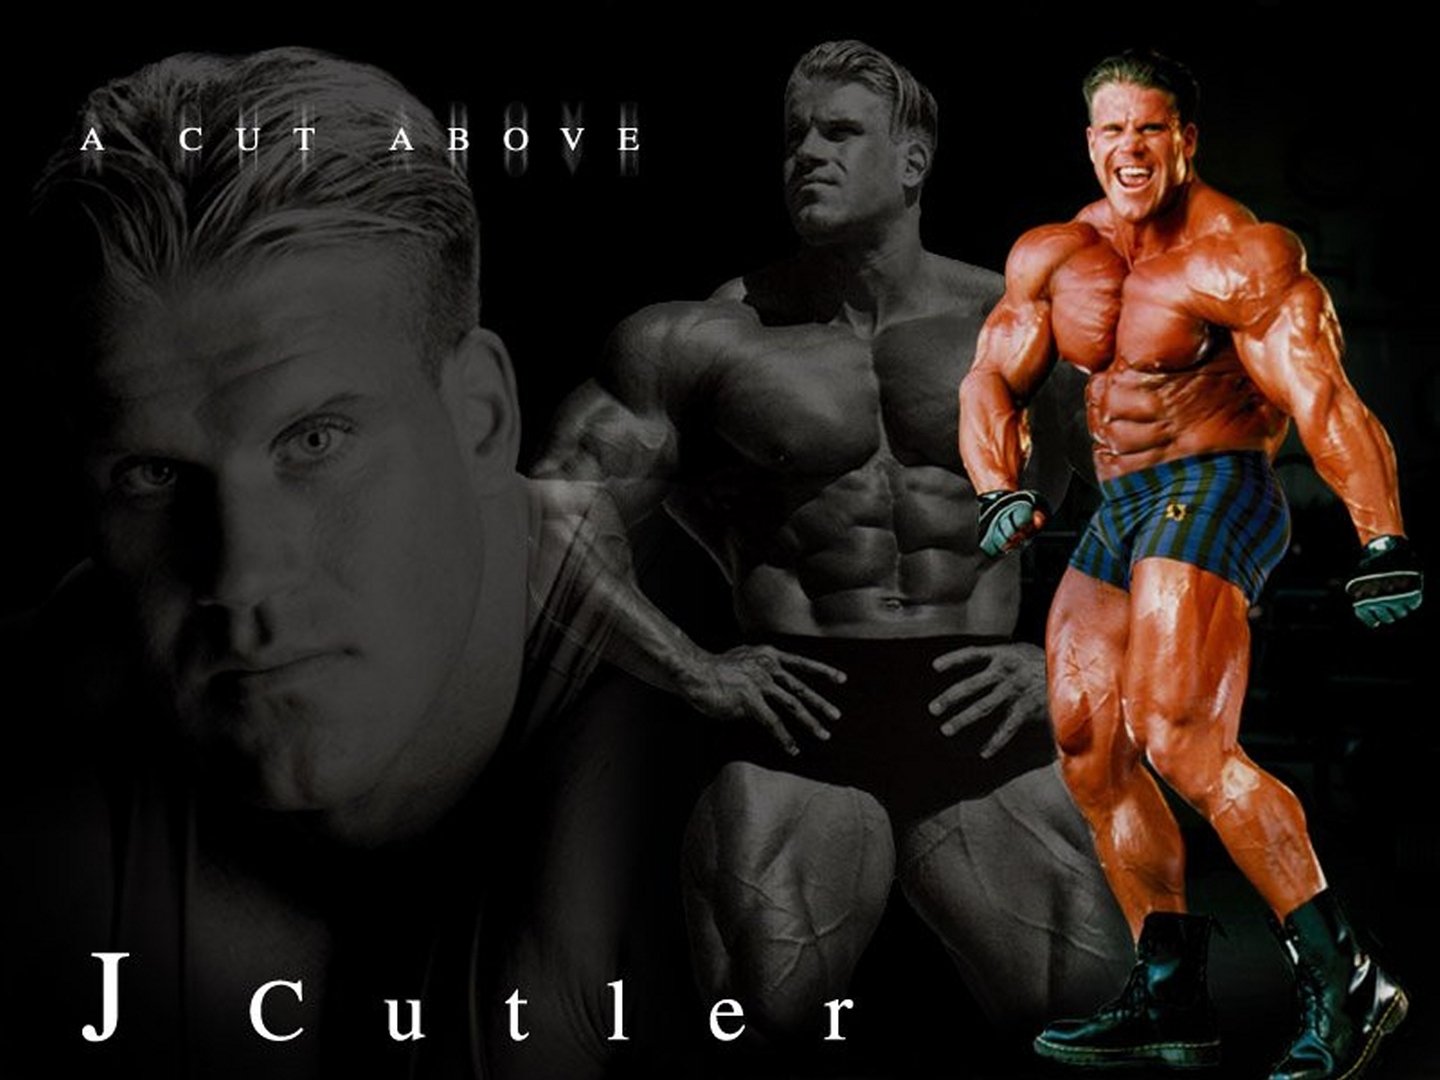 jay cutler hd wallpaper,bodybuilding,bodybuilder,muscle,physical fitness,fitness professional